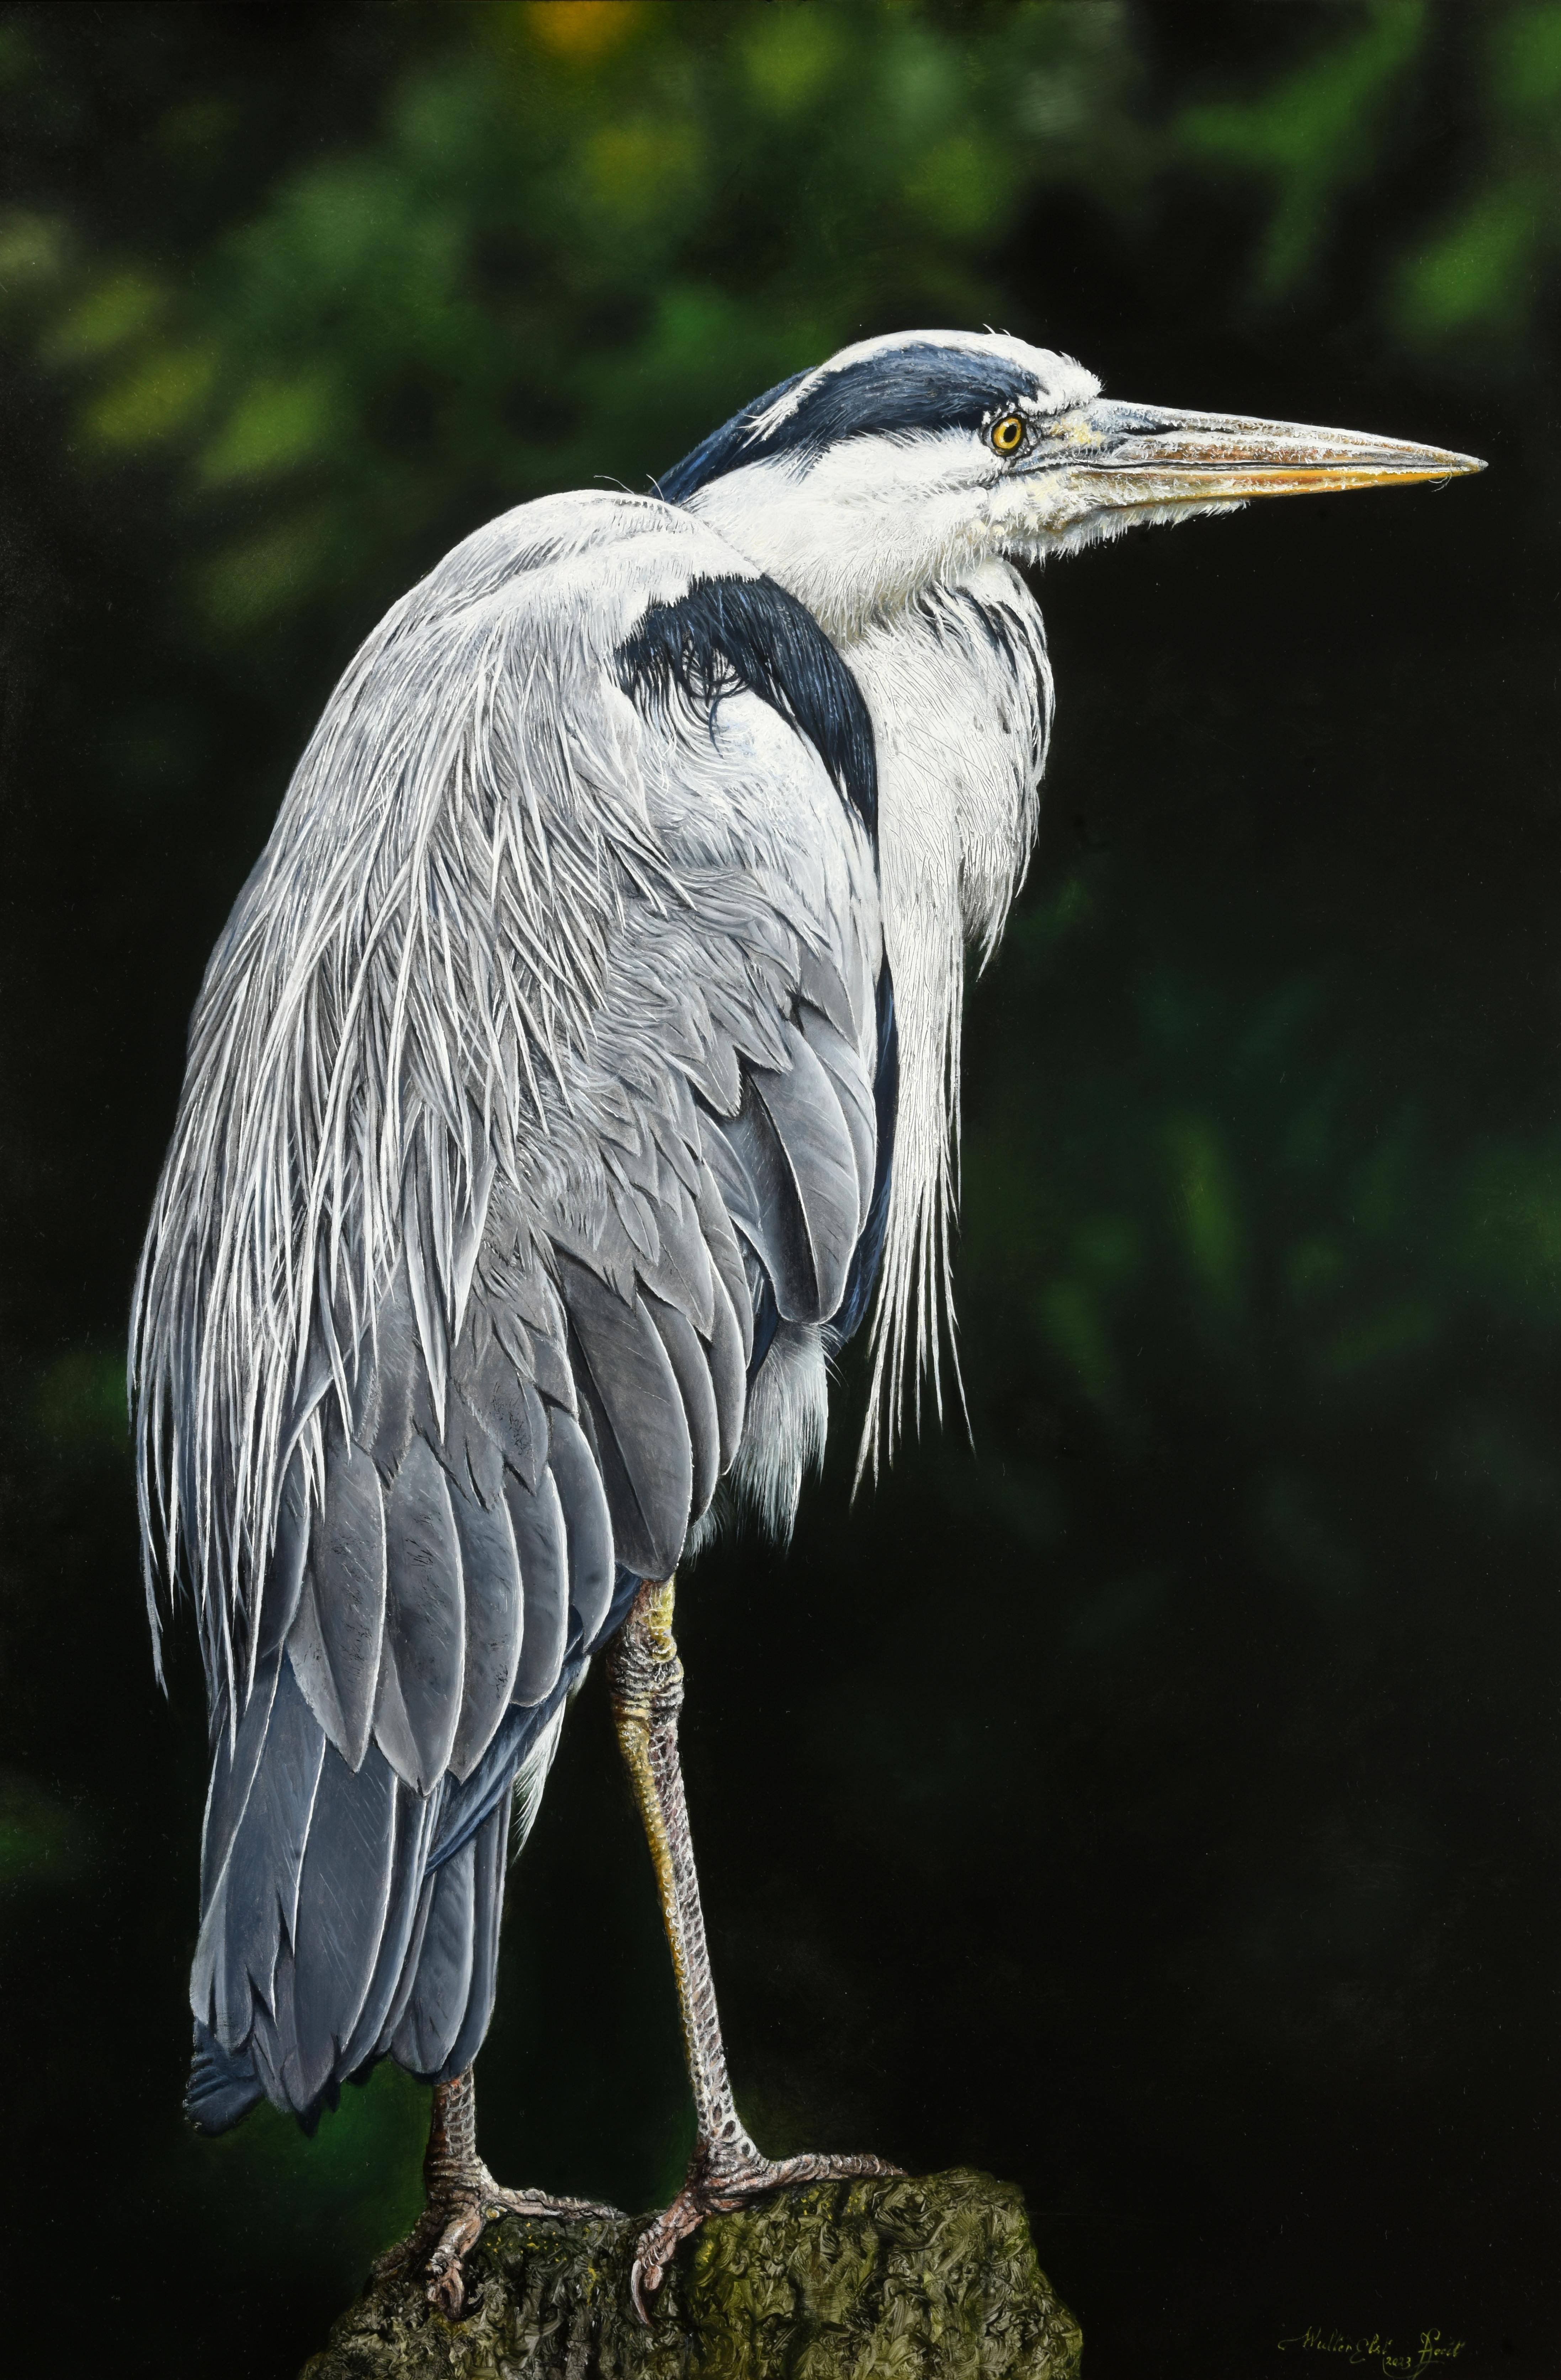 Blauwe Reiger Blue Heron Oil Painting on Panel Bird Animal In Stock
Walter Elst Born in Antwerp, Belgium - 1955  After finishing his study Medicine at the University of Brussels Walter Elst decided to dedicate himself to his calling painting.